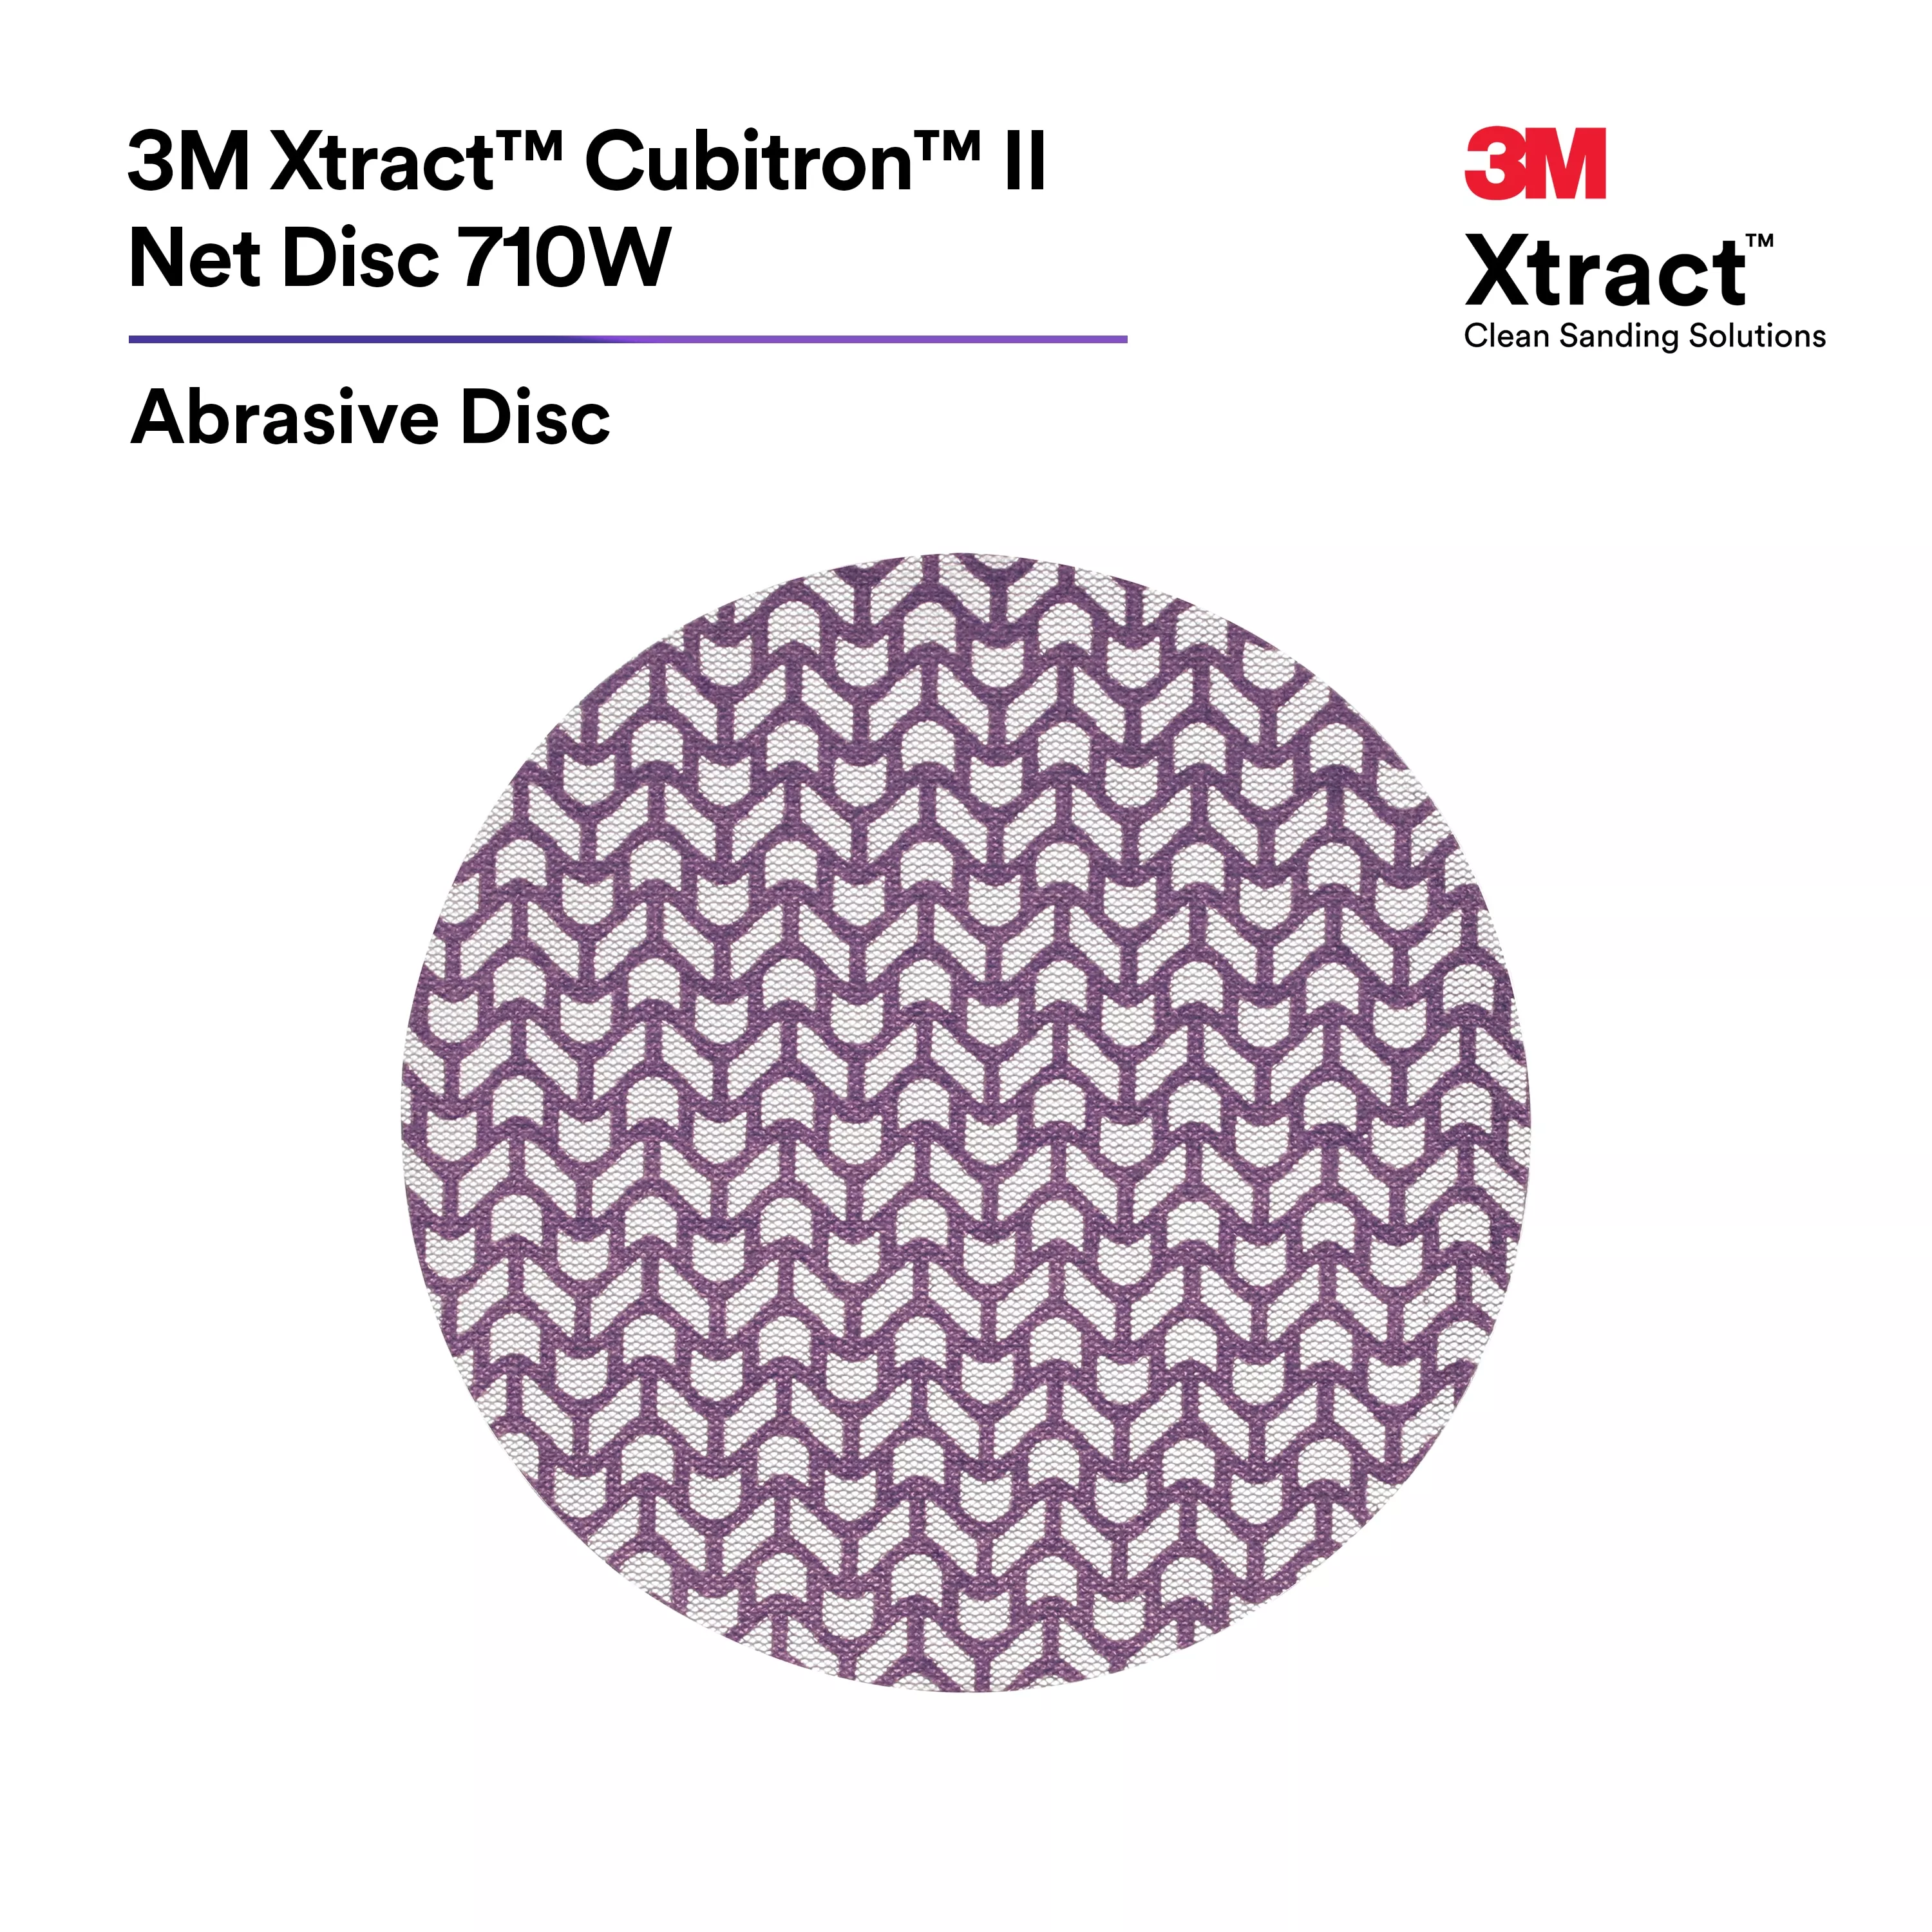 Product Number 710W | 3M Xtract™ Cubitron™ II Net Disc 710W